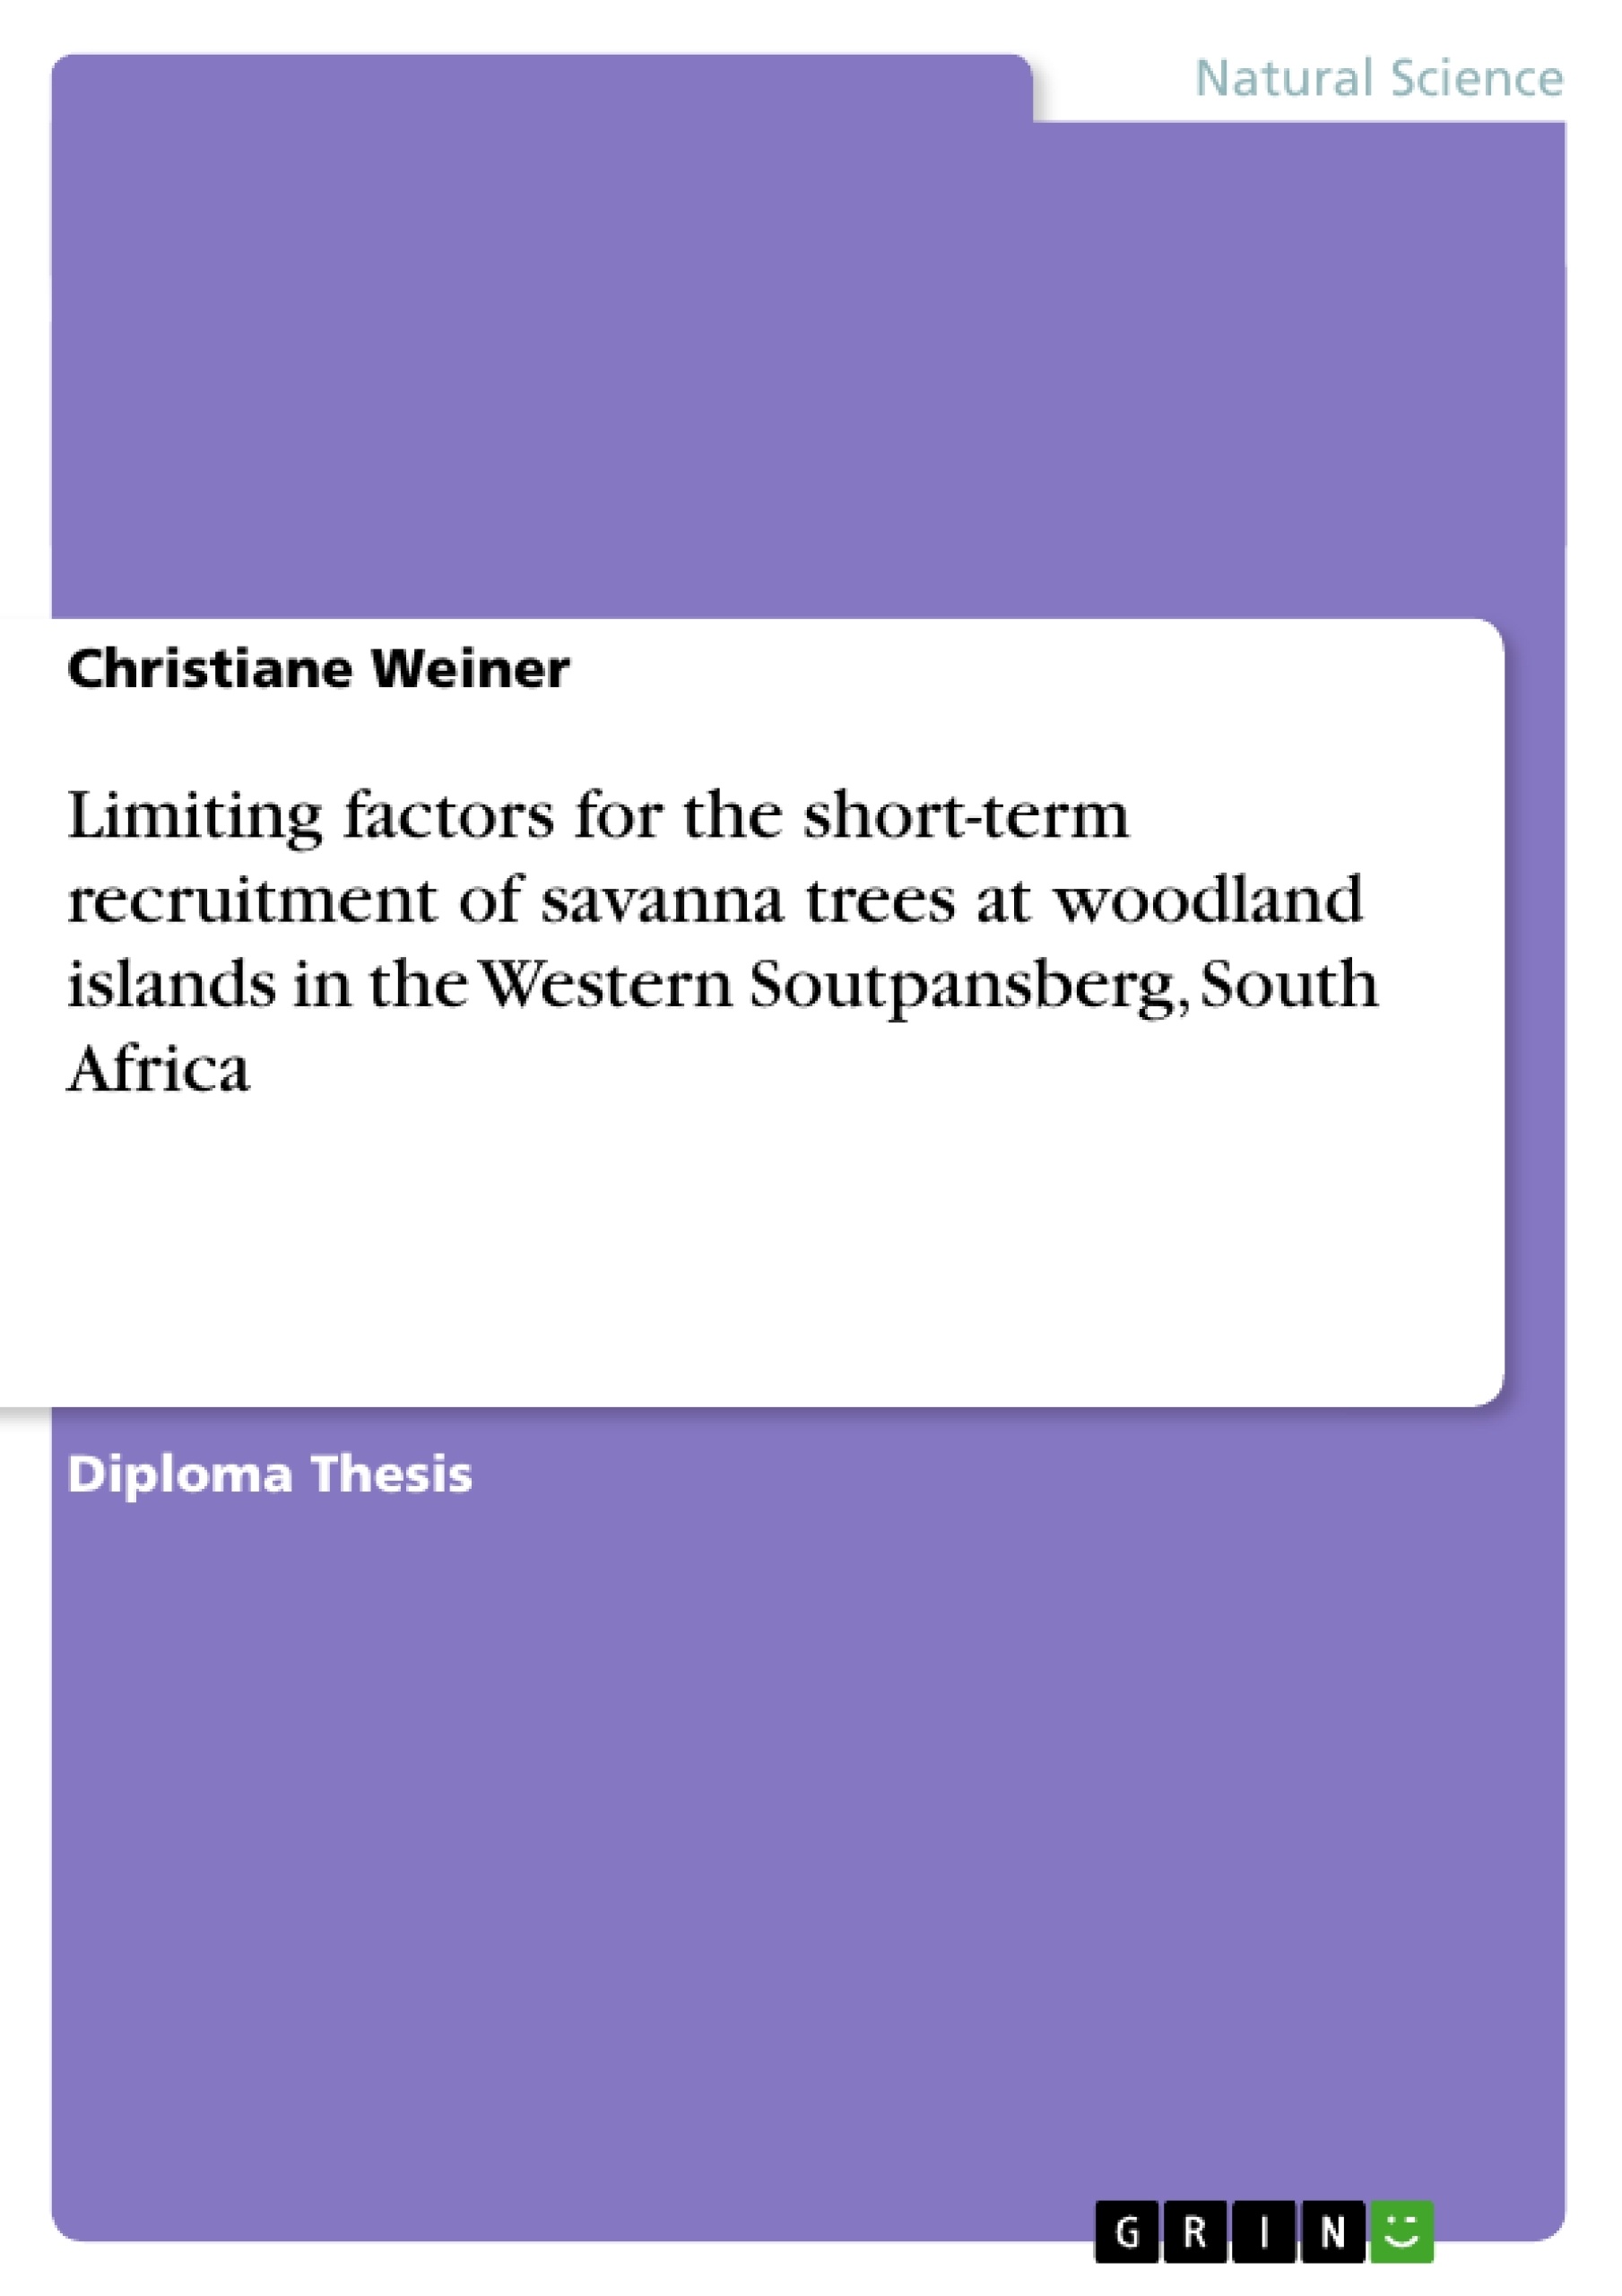 Title: Limiting factors for the short-term recruitment of savanna trees at woodland islands in the Western Soutpansberg, South Africa